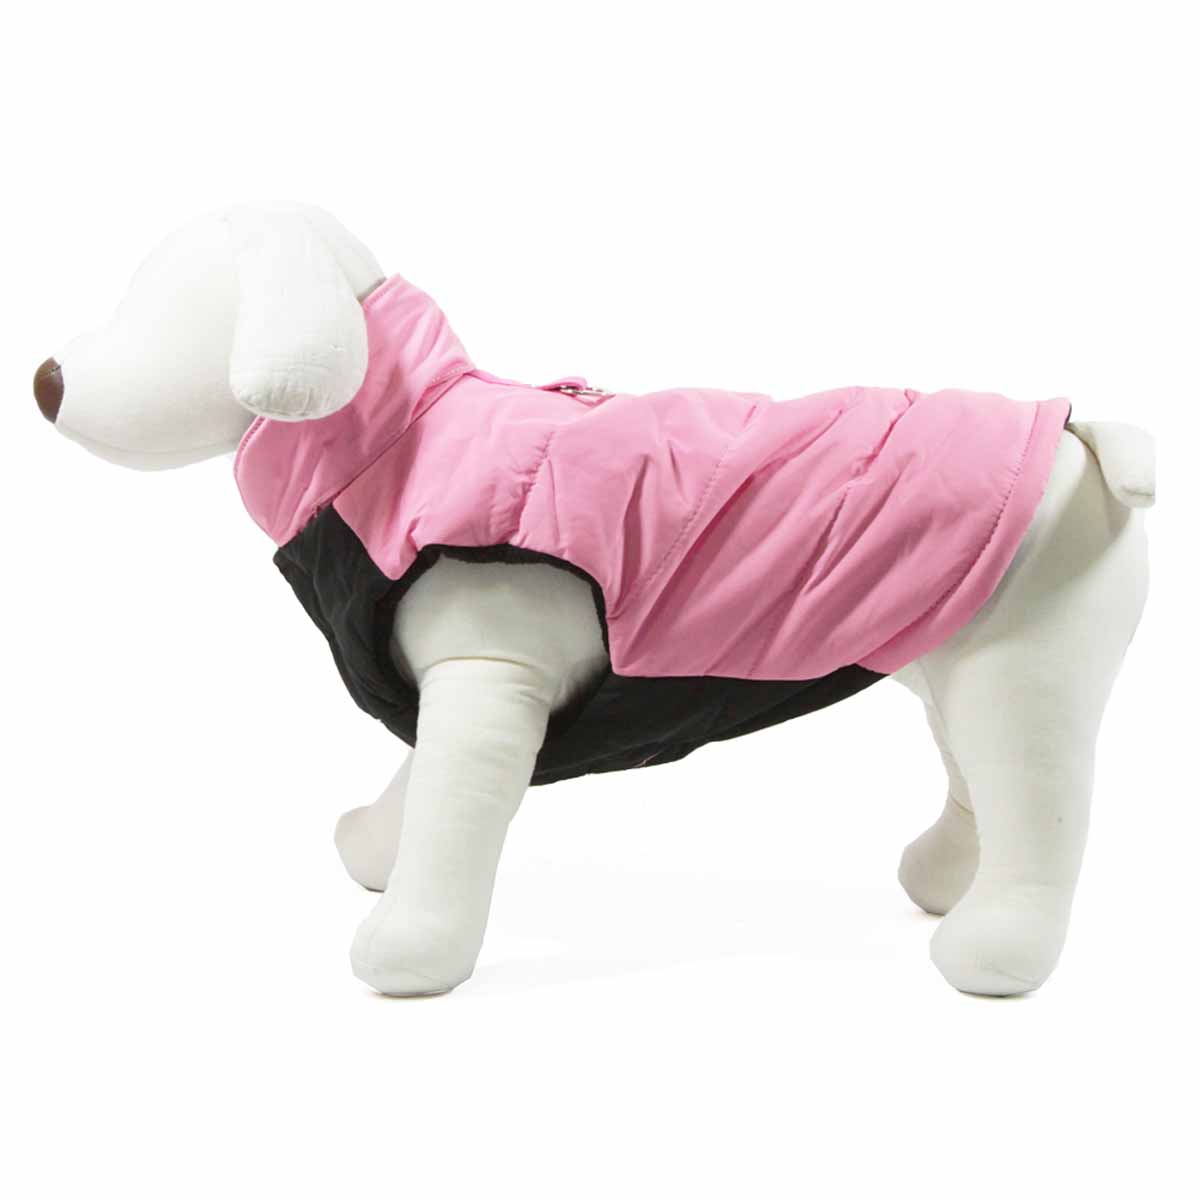 Wind Parka Dog Coat by Gooby - Pink at BaxterBoo